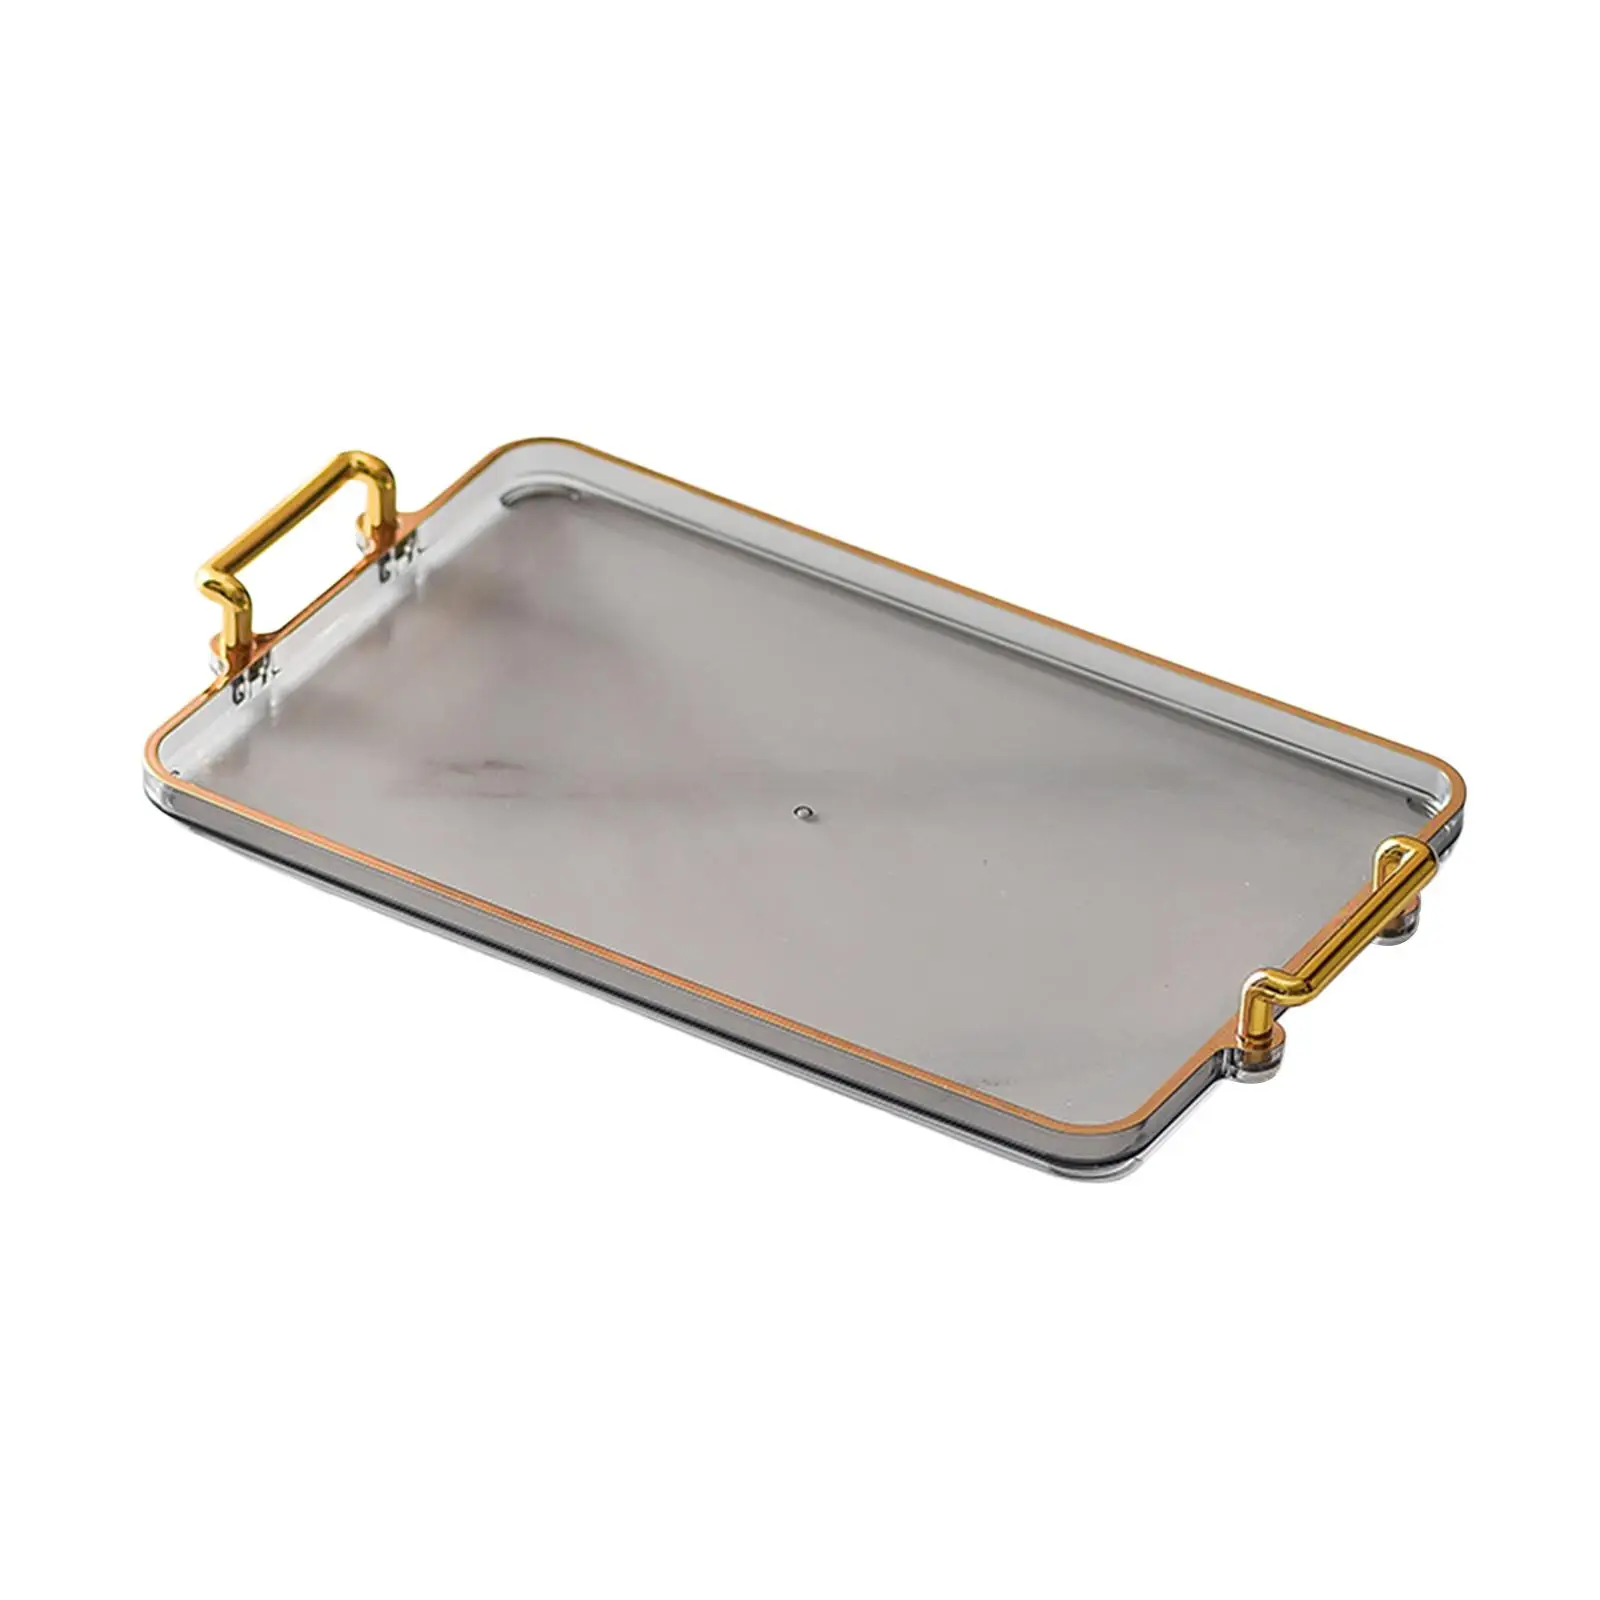 Luxury Farmhouse Serving Tray Countertop Organizer Food Cup Serving Tray